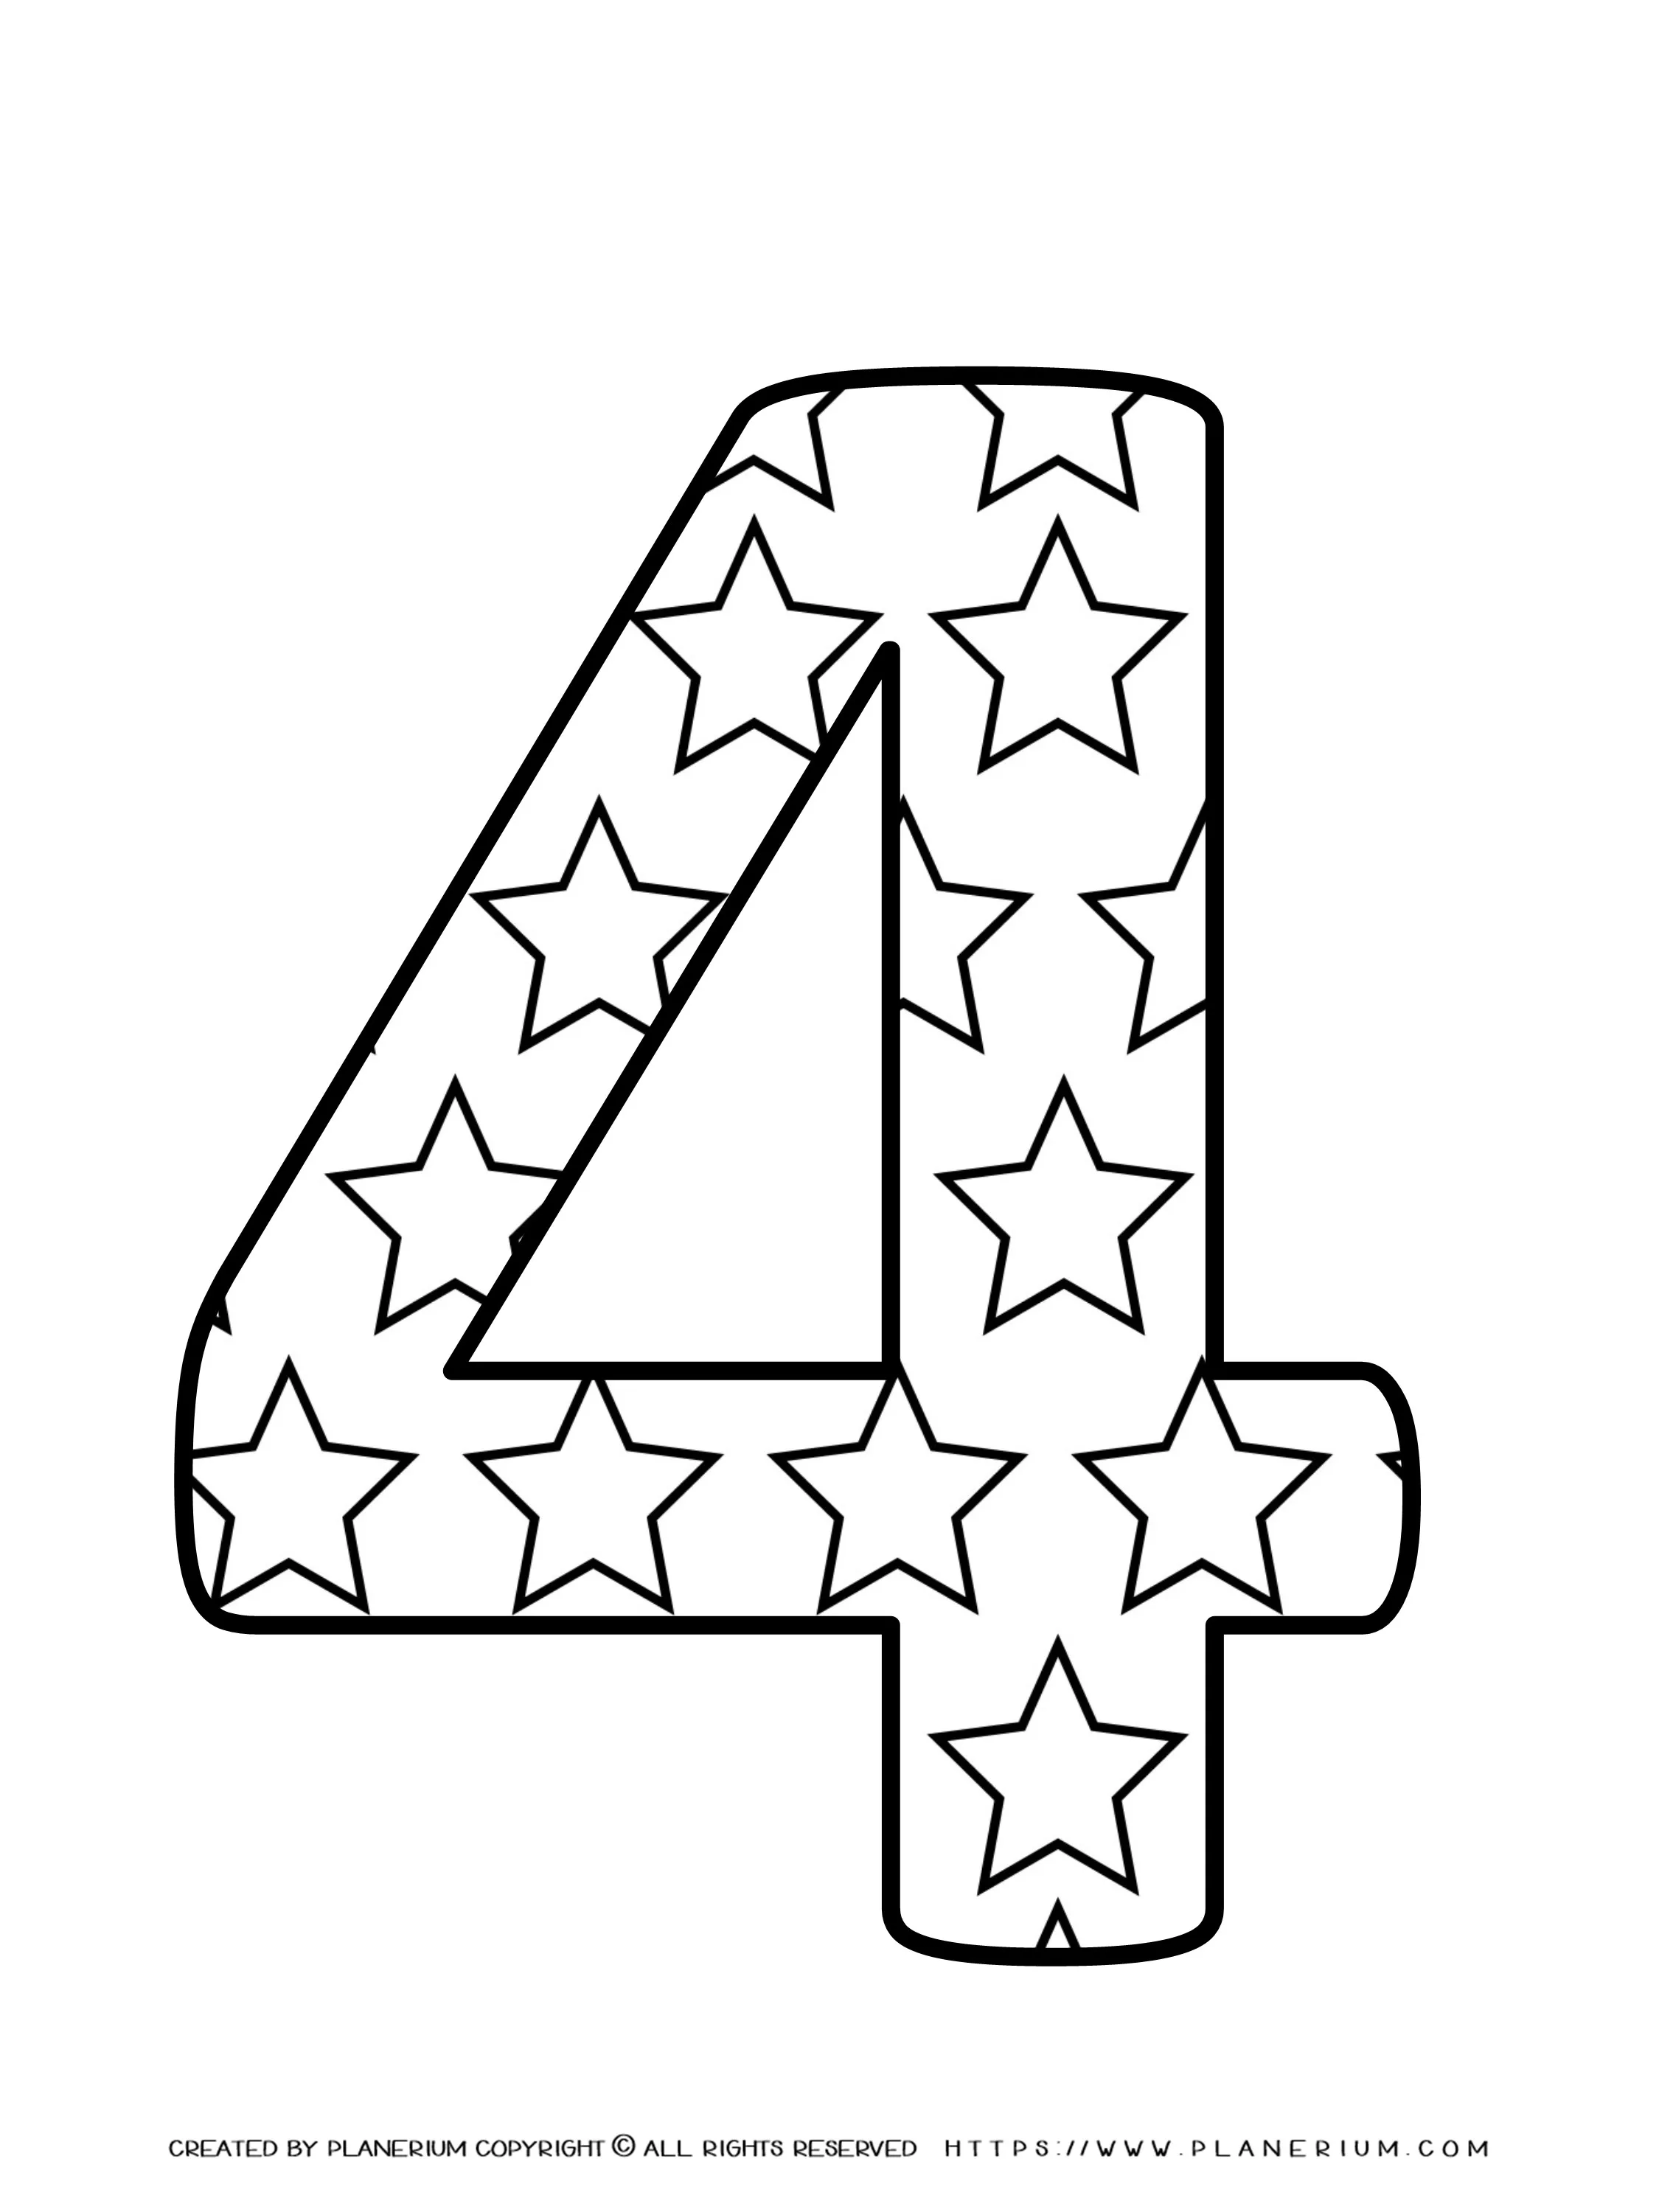 All Seasons   Coloring Page   Number Pattern   Four   Planerium